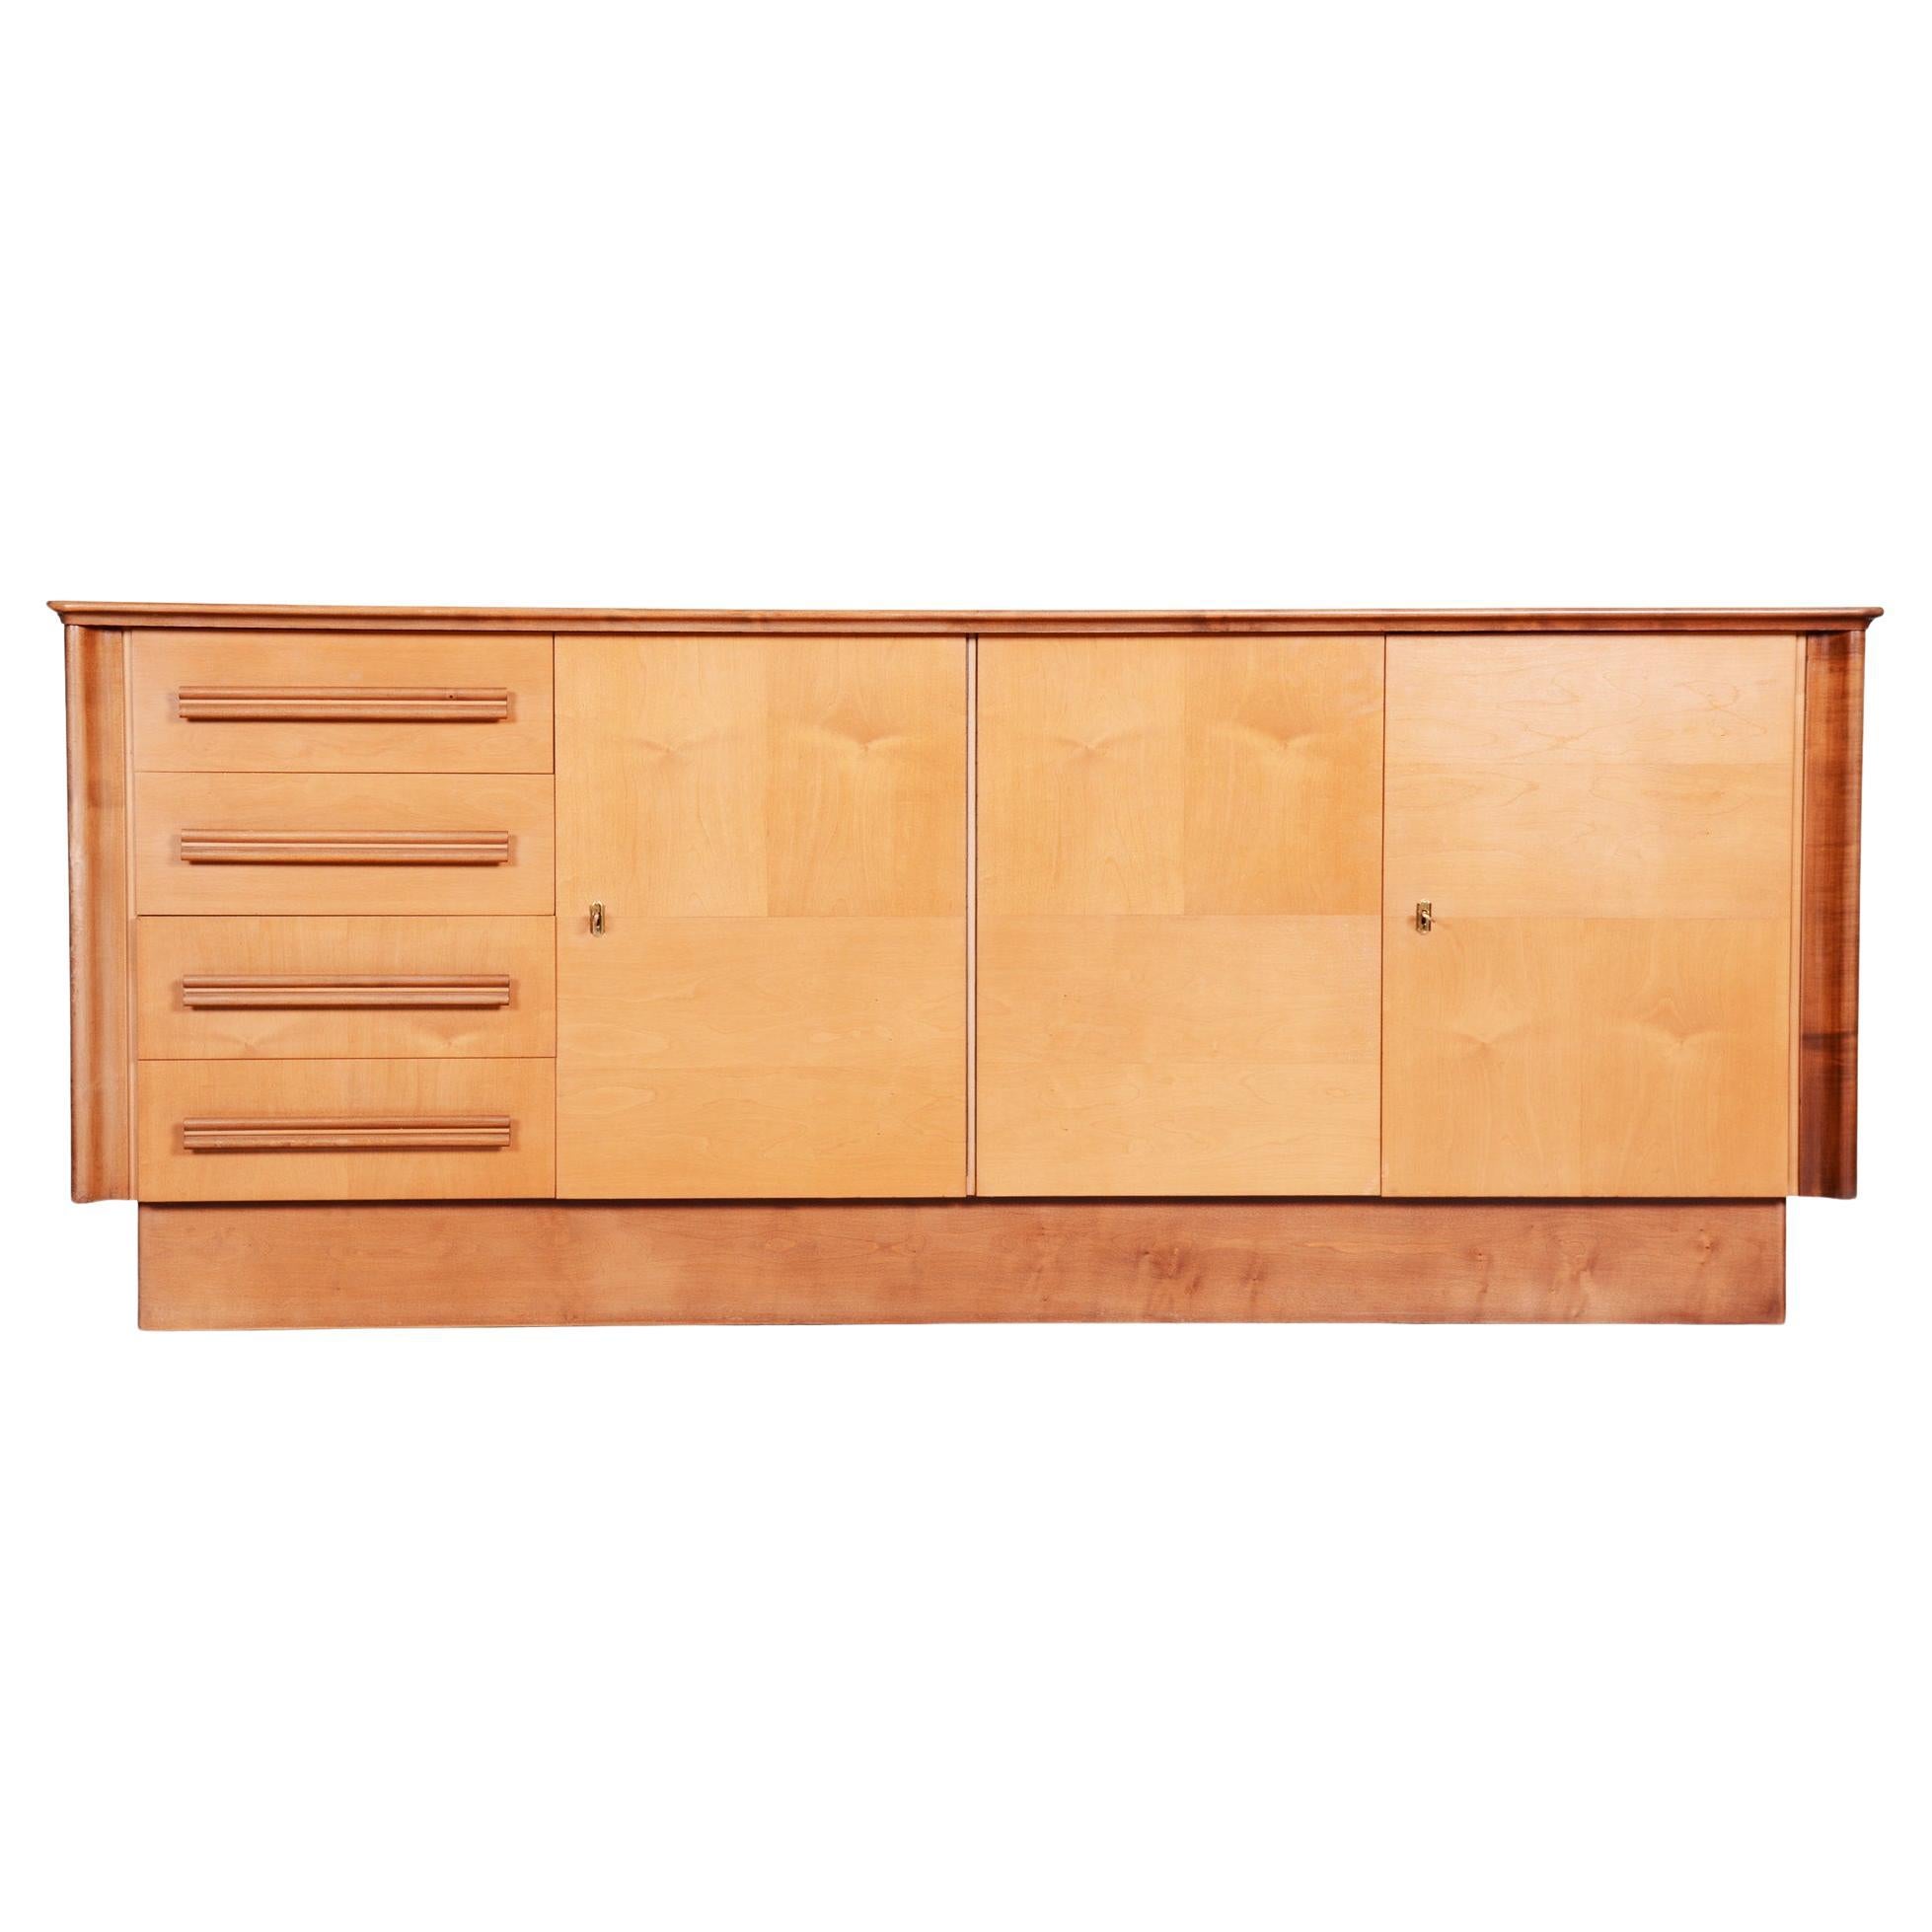 Original Mid-Century Sideboard, Maple, Well Preserved, Czech, 1950s